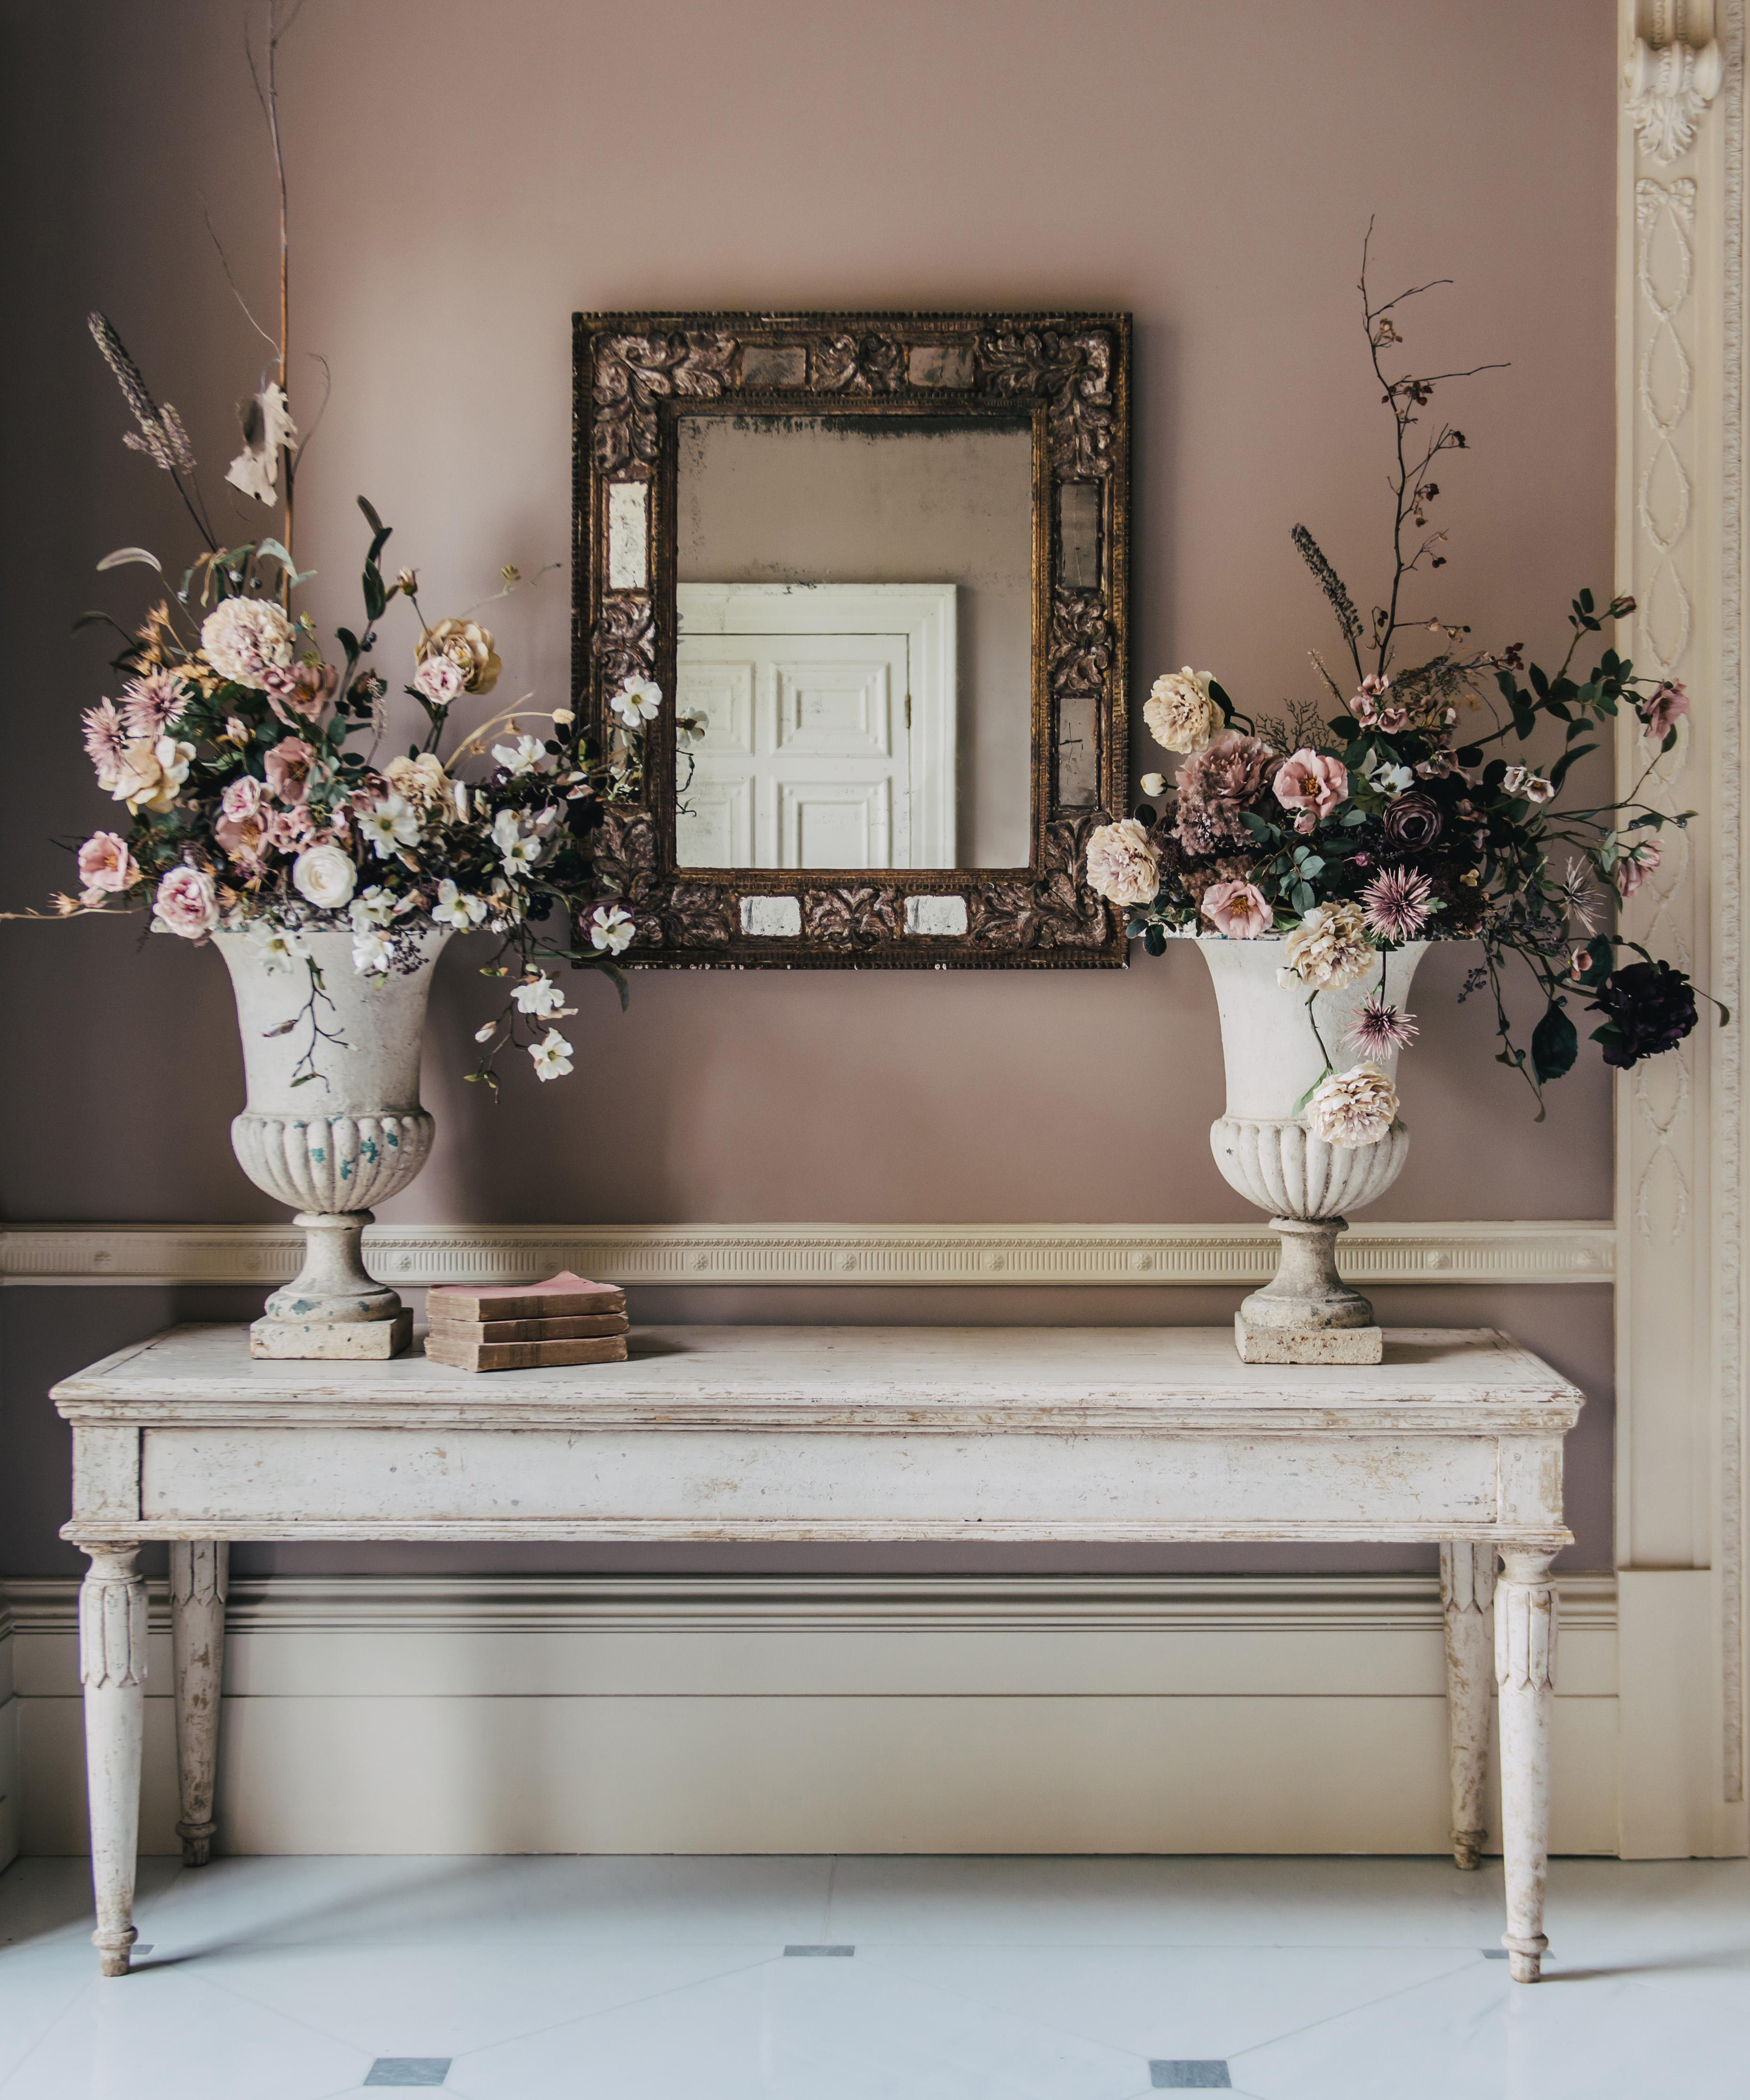 Silk flowers combine with dried stems for a painterly look